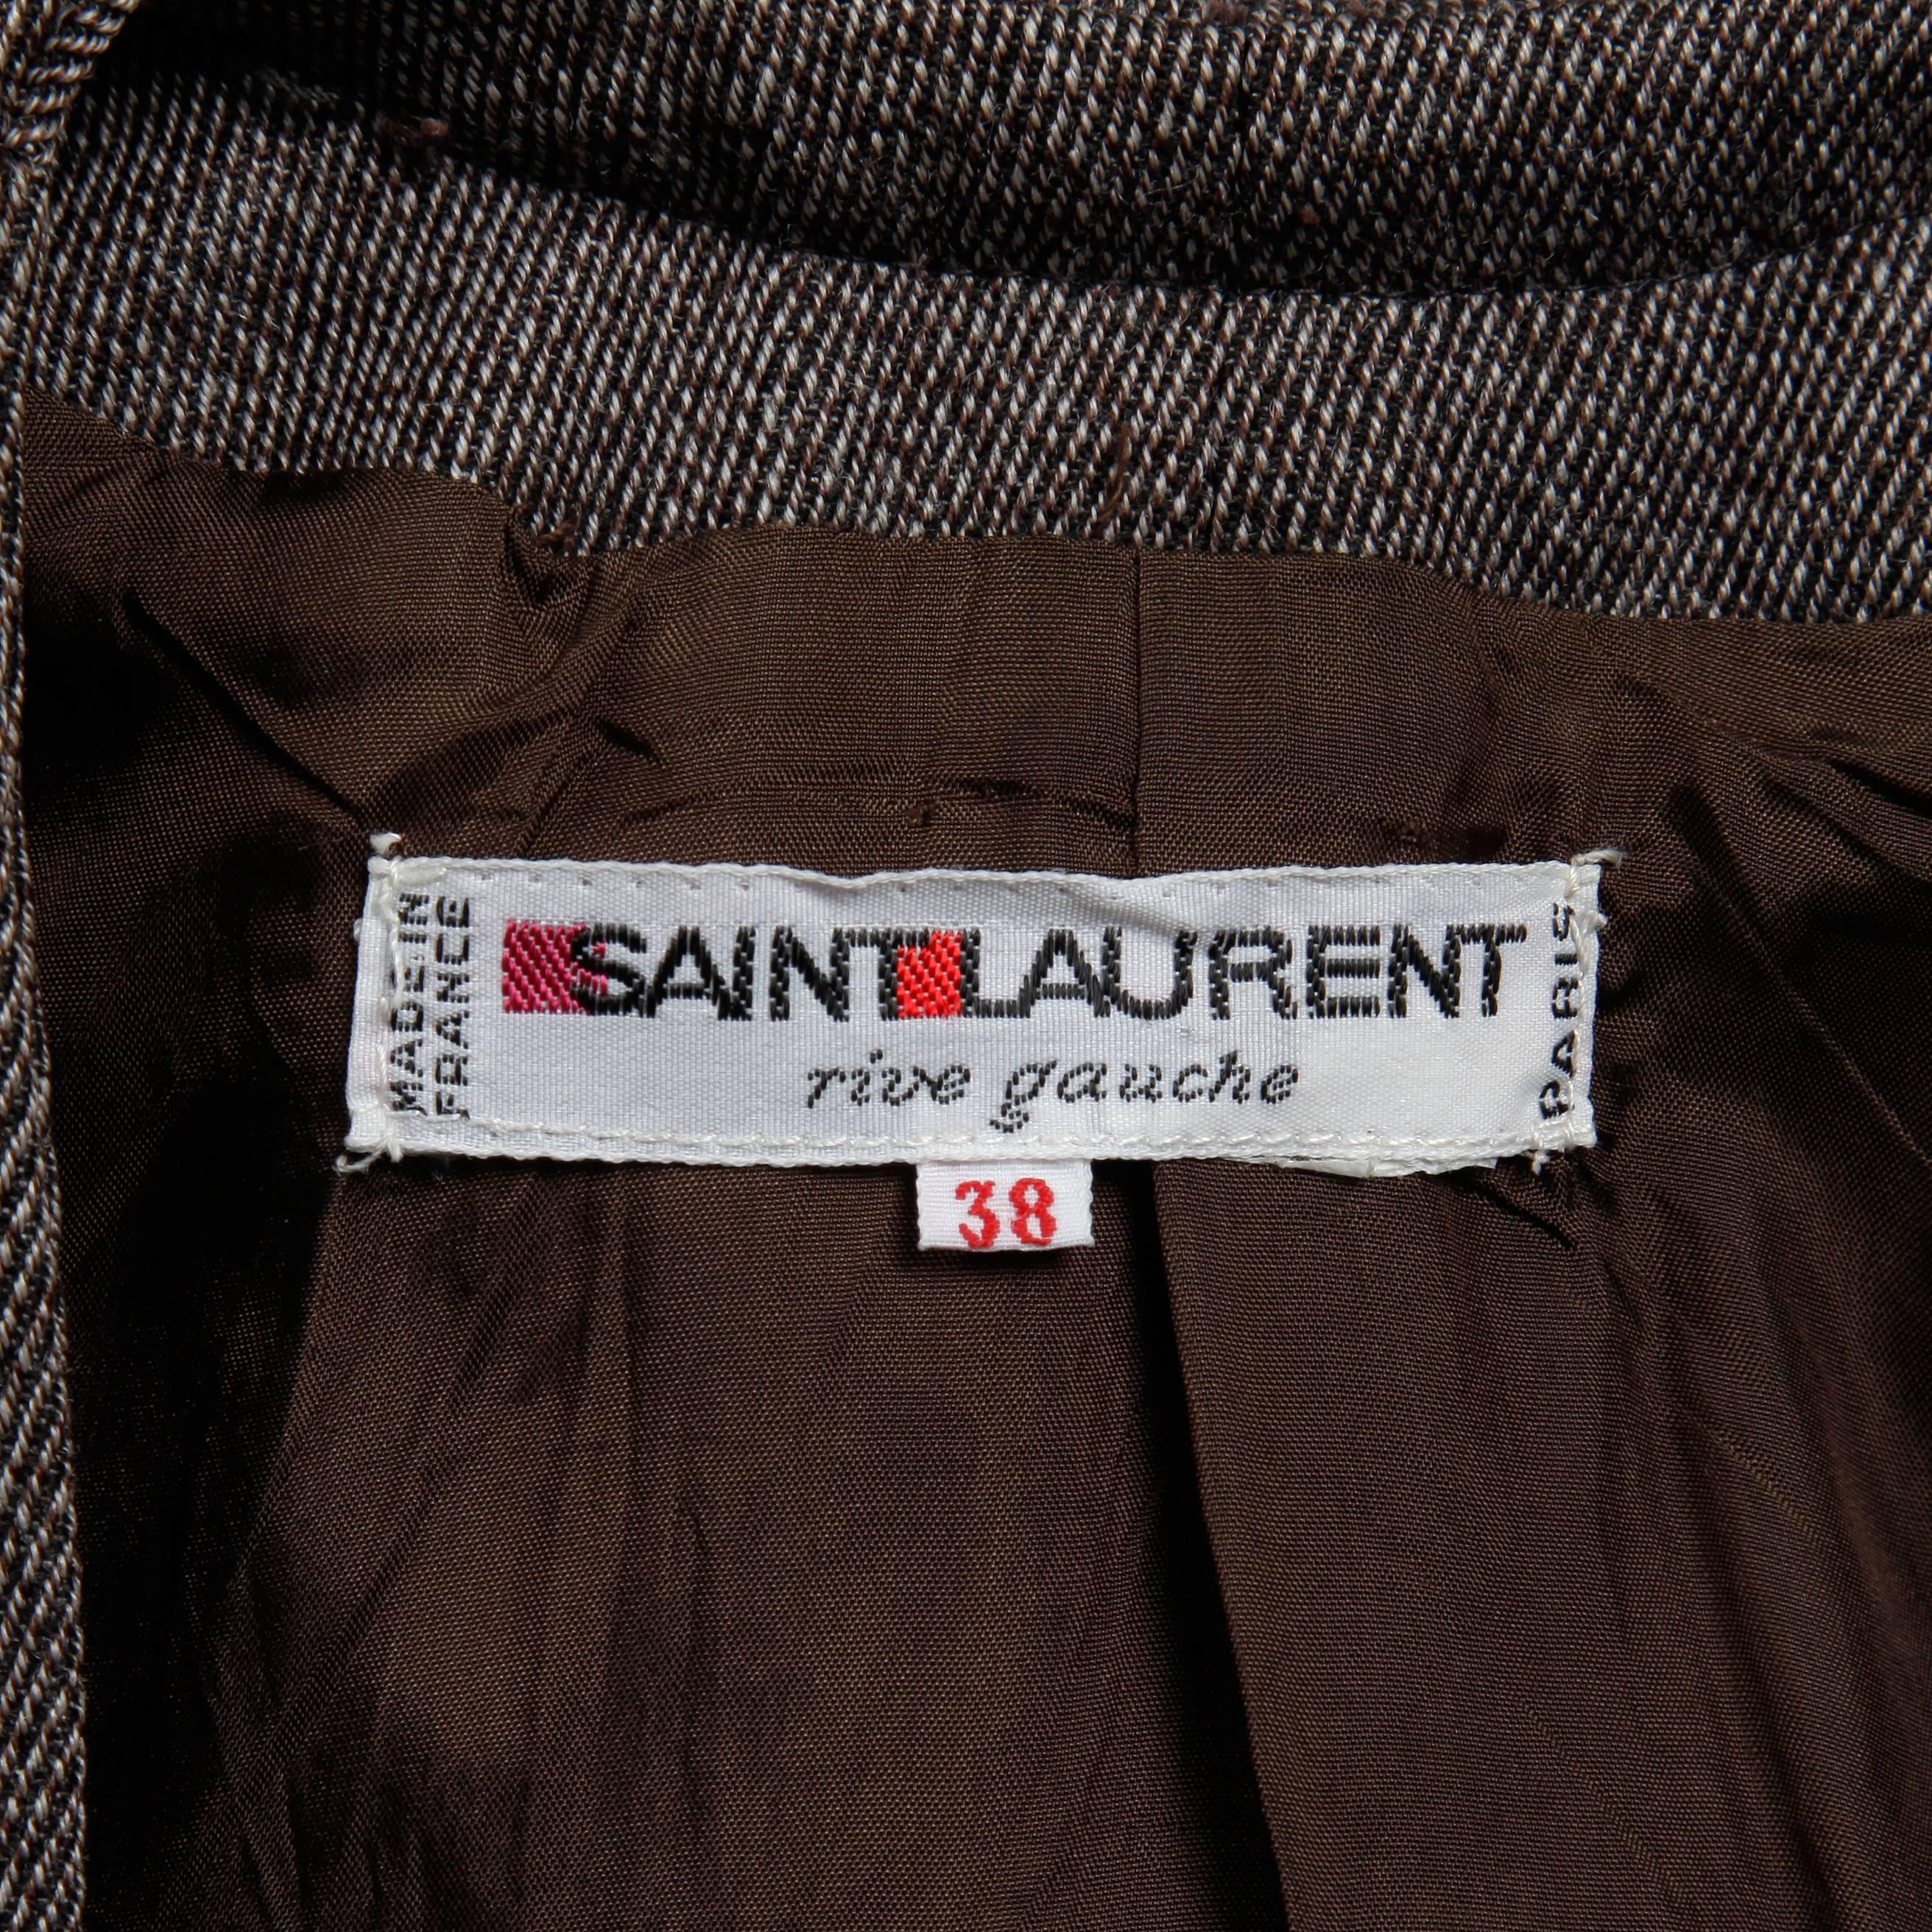 Vintage Yves Saint Laurent cropped bolero jacket in brown wool tweed. Fully lined with no closure (hangs open). Structured shoulder pads are sewn in underneath the lining. The marked size is 38, and the jacket fits like a modern medium. The bust